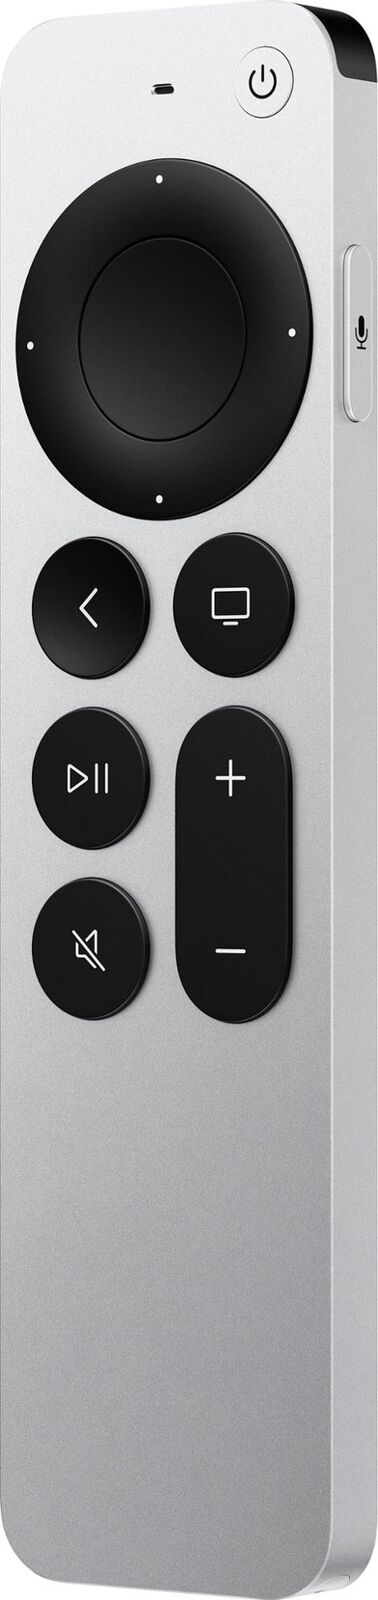 Can Apple TV Remote Control a Sound Bar? Unleashing the Power of Your Remote